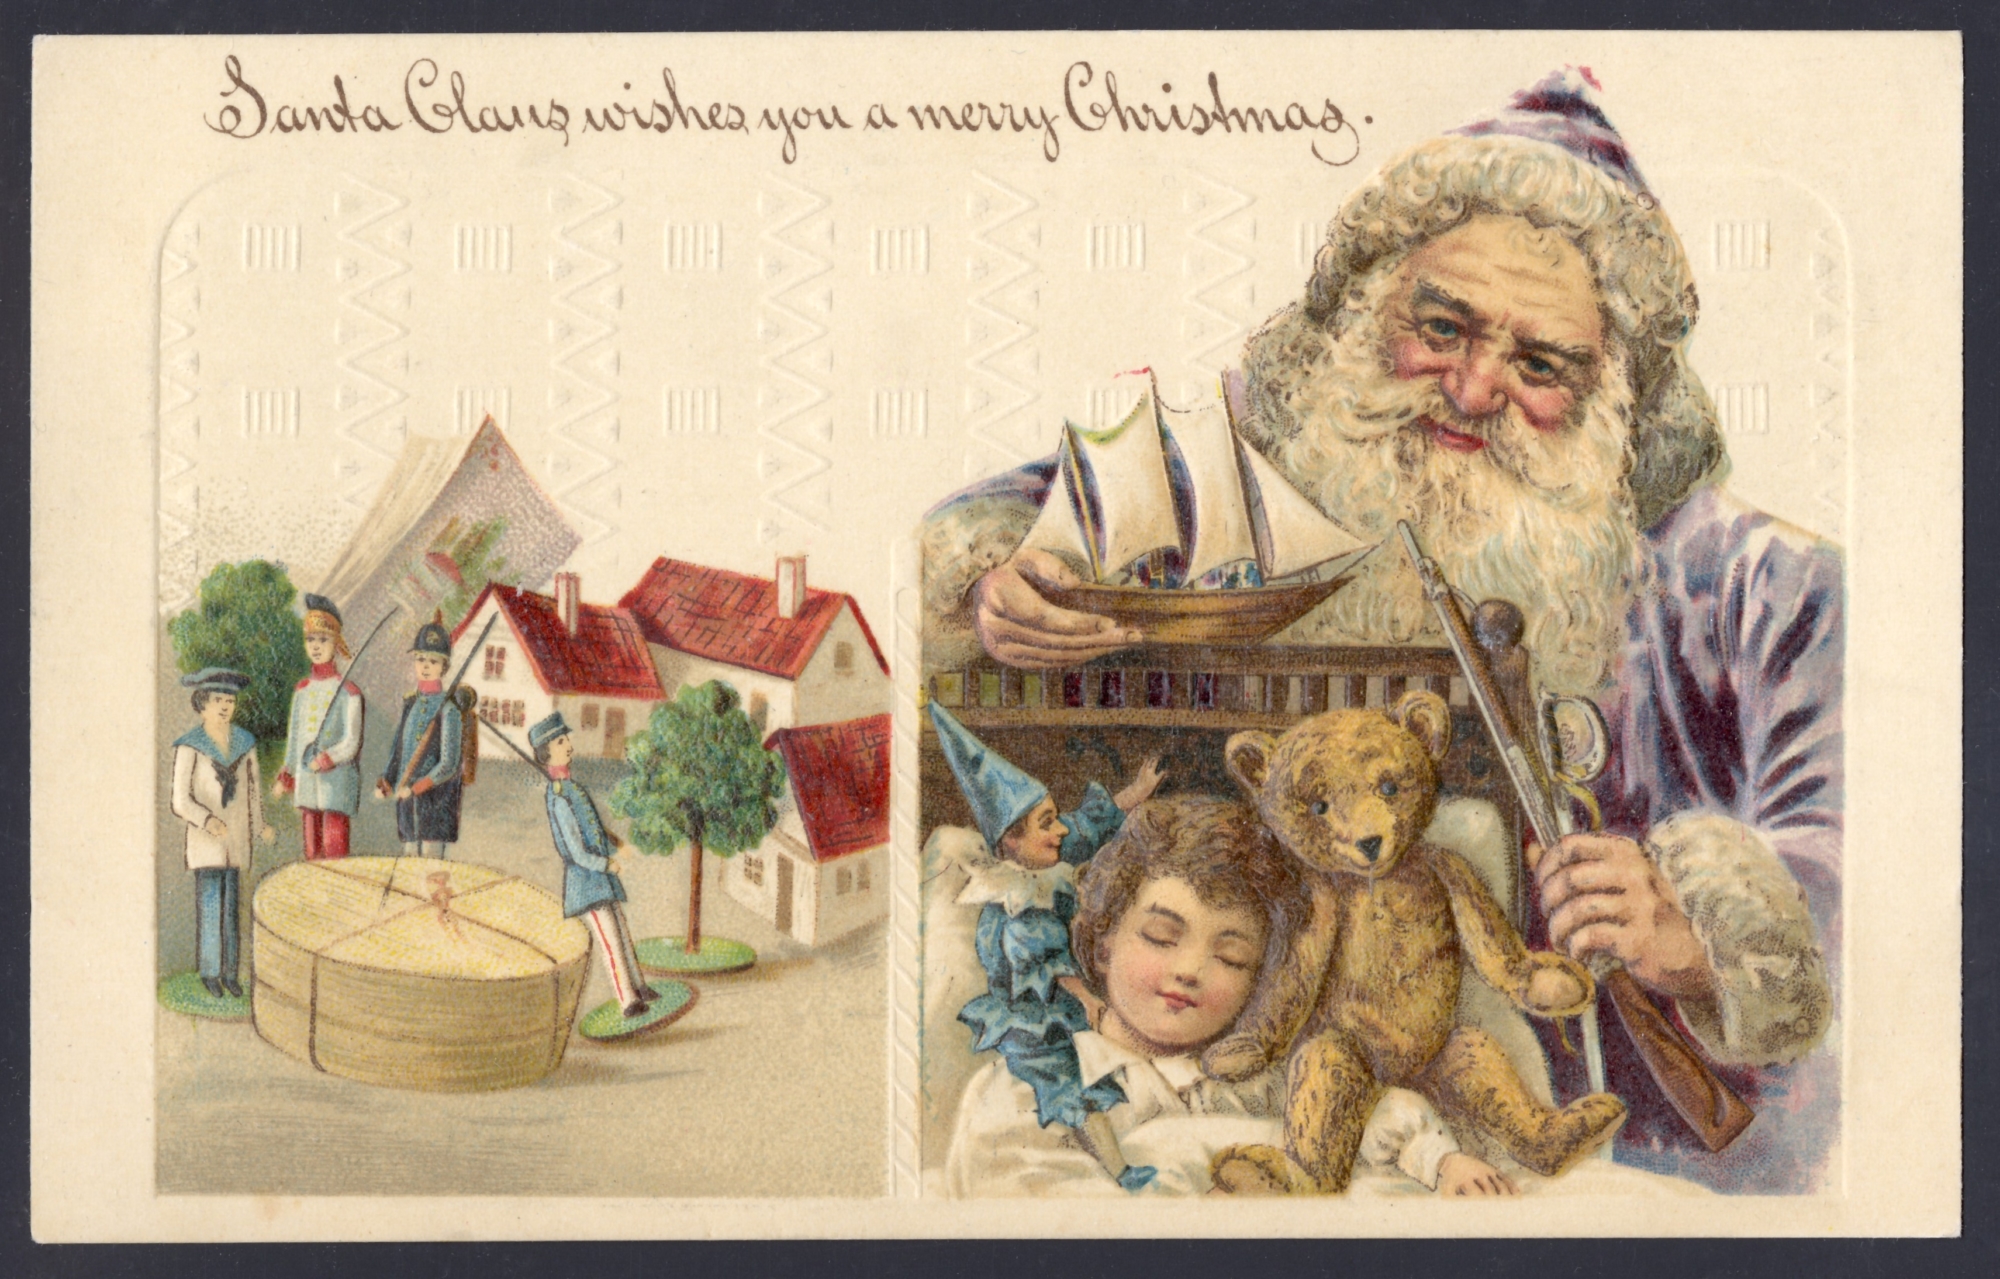 Santa wearing a purple robe. Lithographed in Germany (embossed; variety)